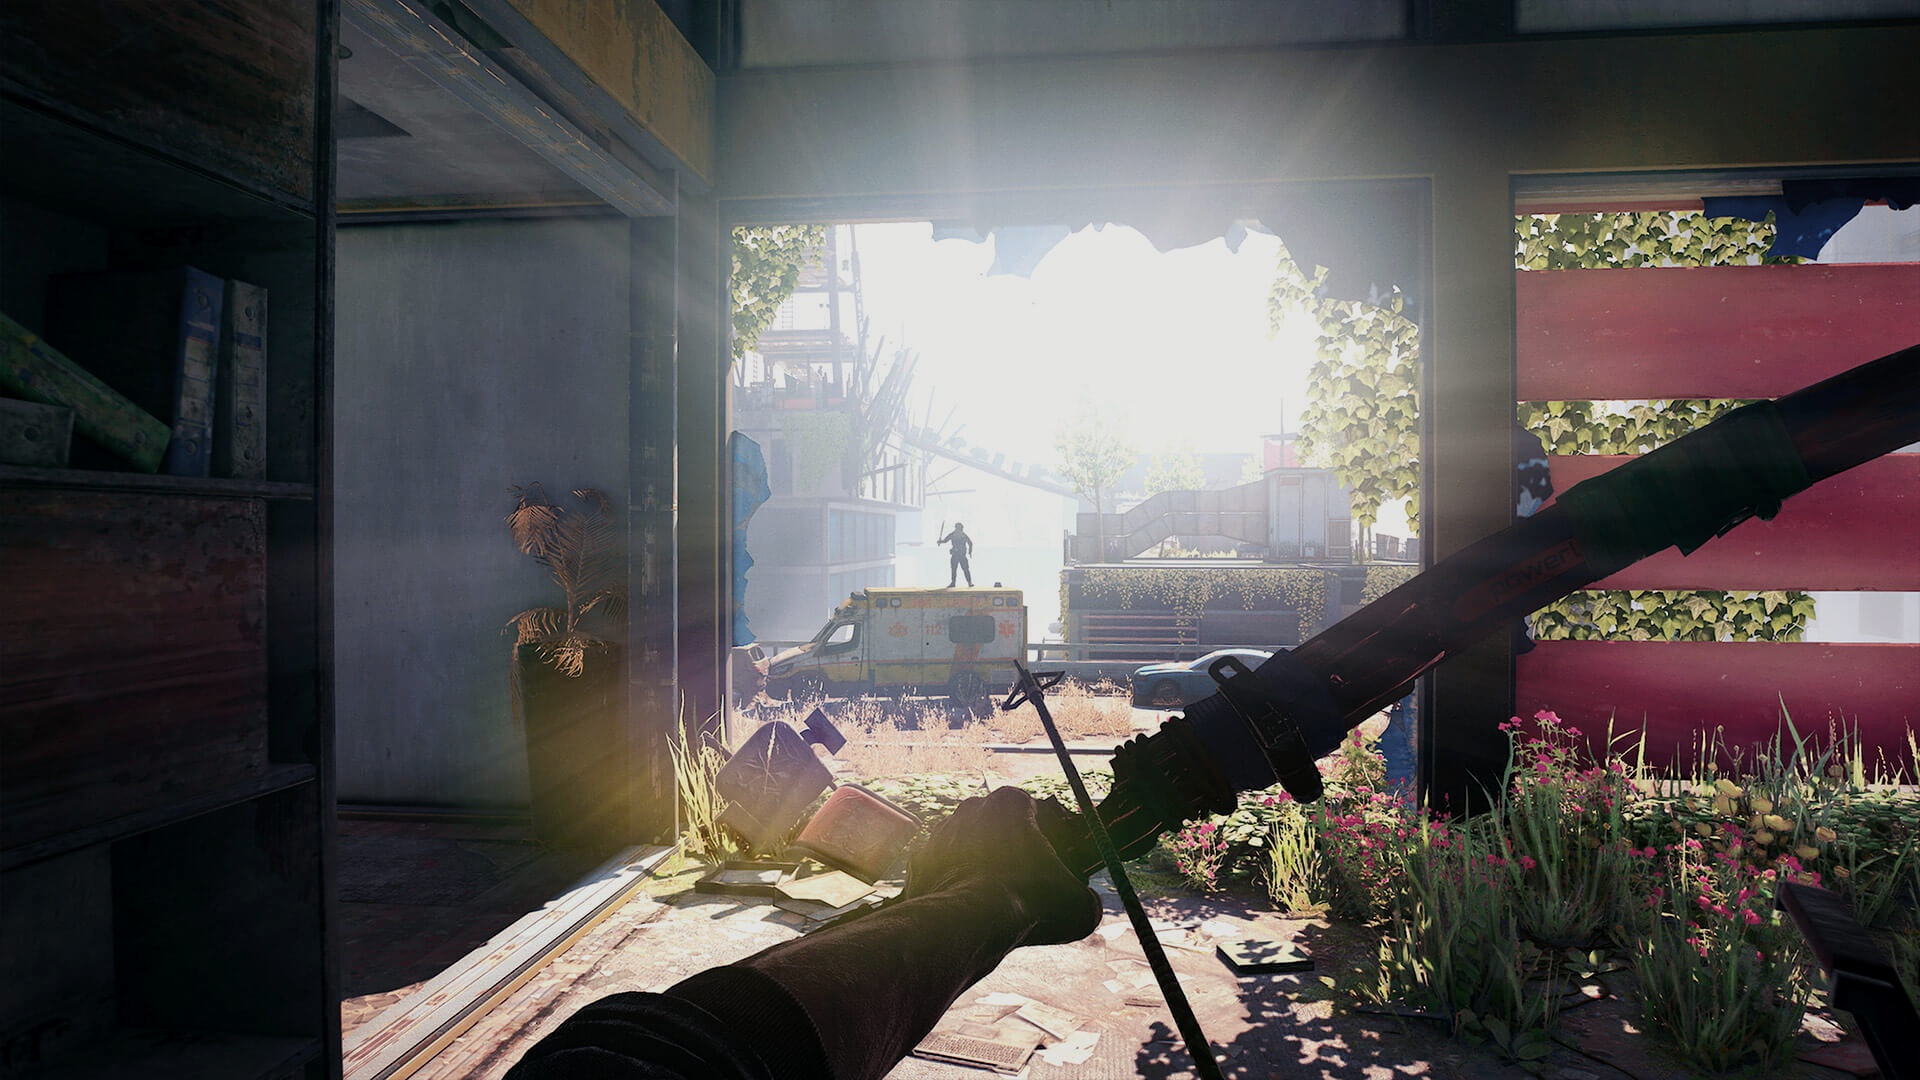 Dying Light 2 PC requirements I Minimum, recommended and ray-tracing